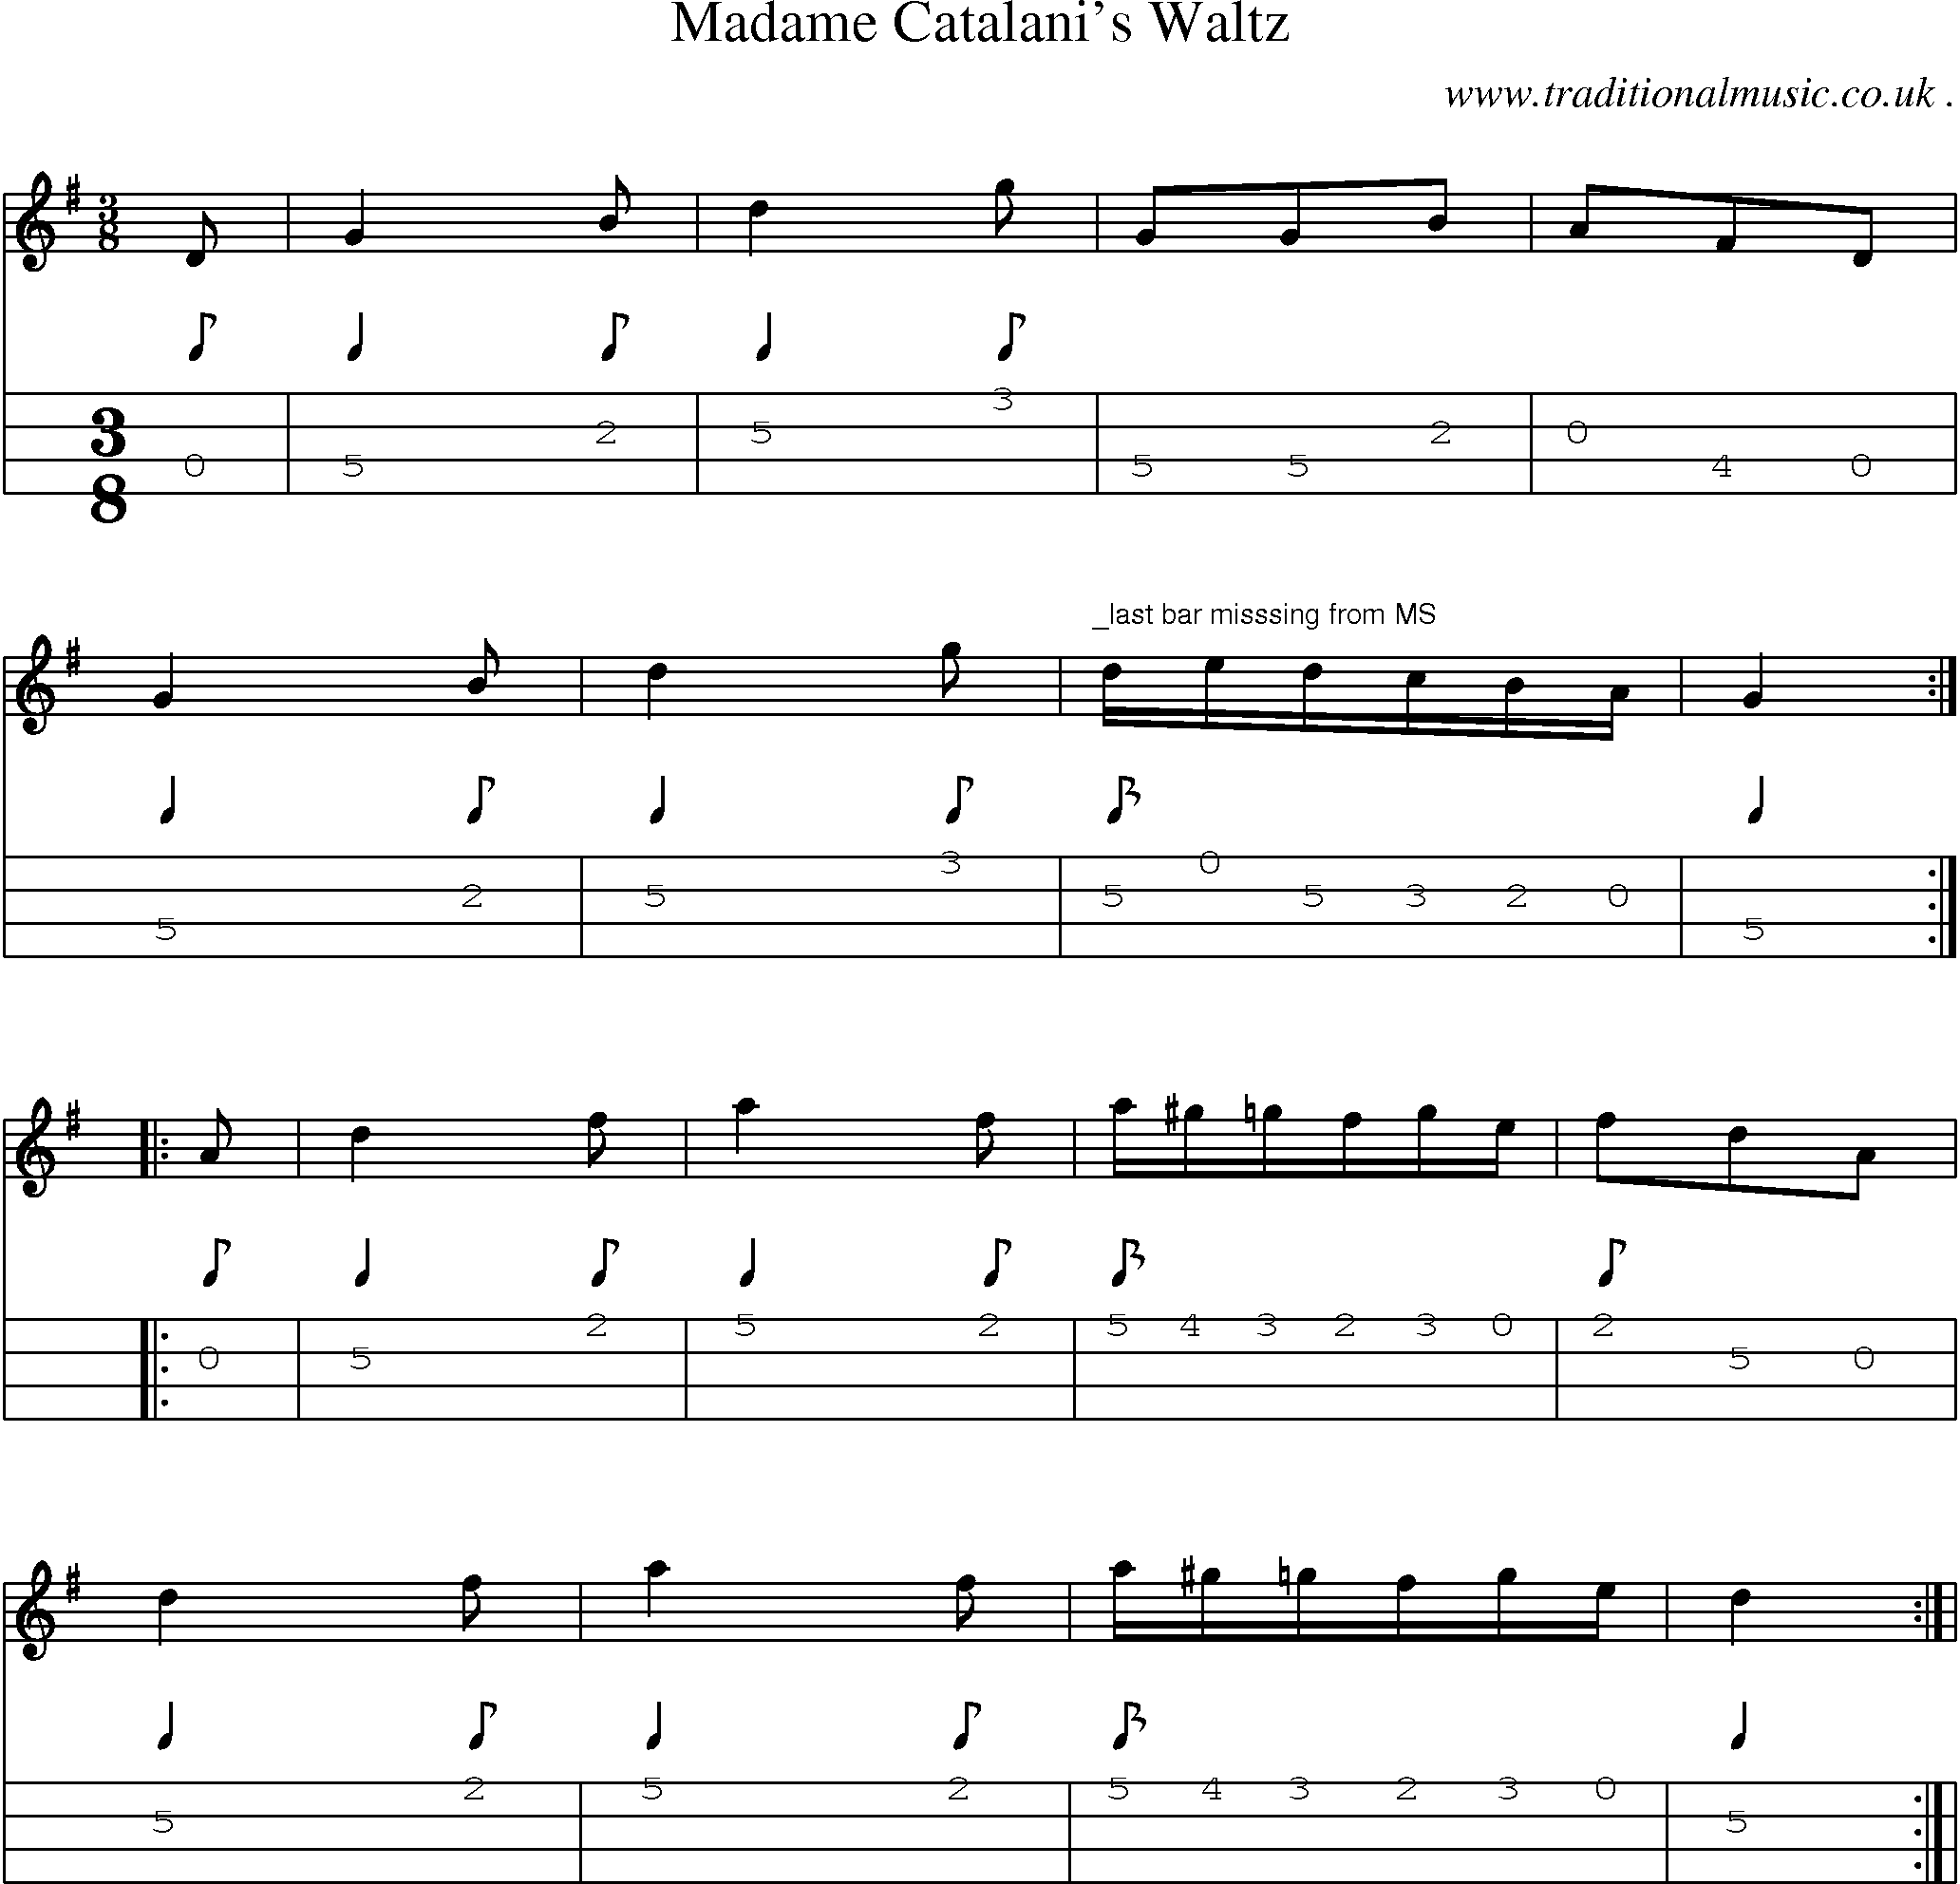 Sheet-Music and Mandolin Tabs for Madame Catalanis Waltz